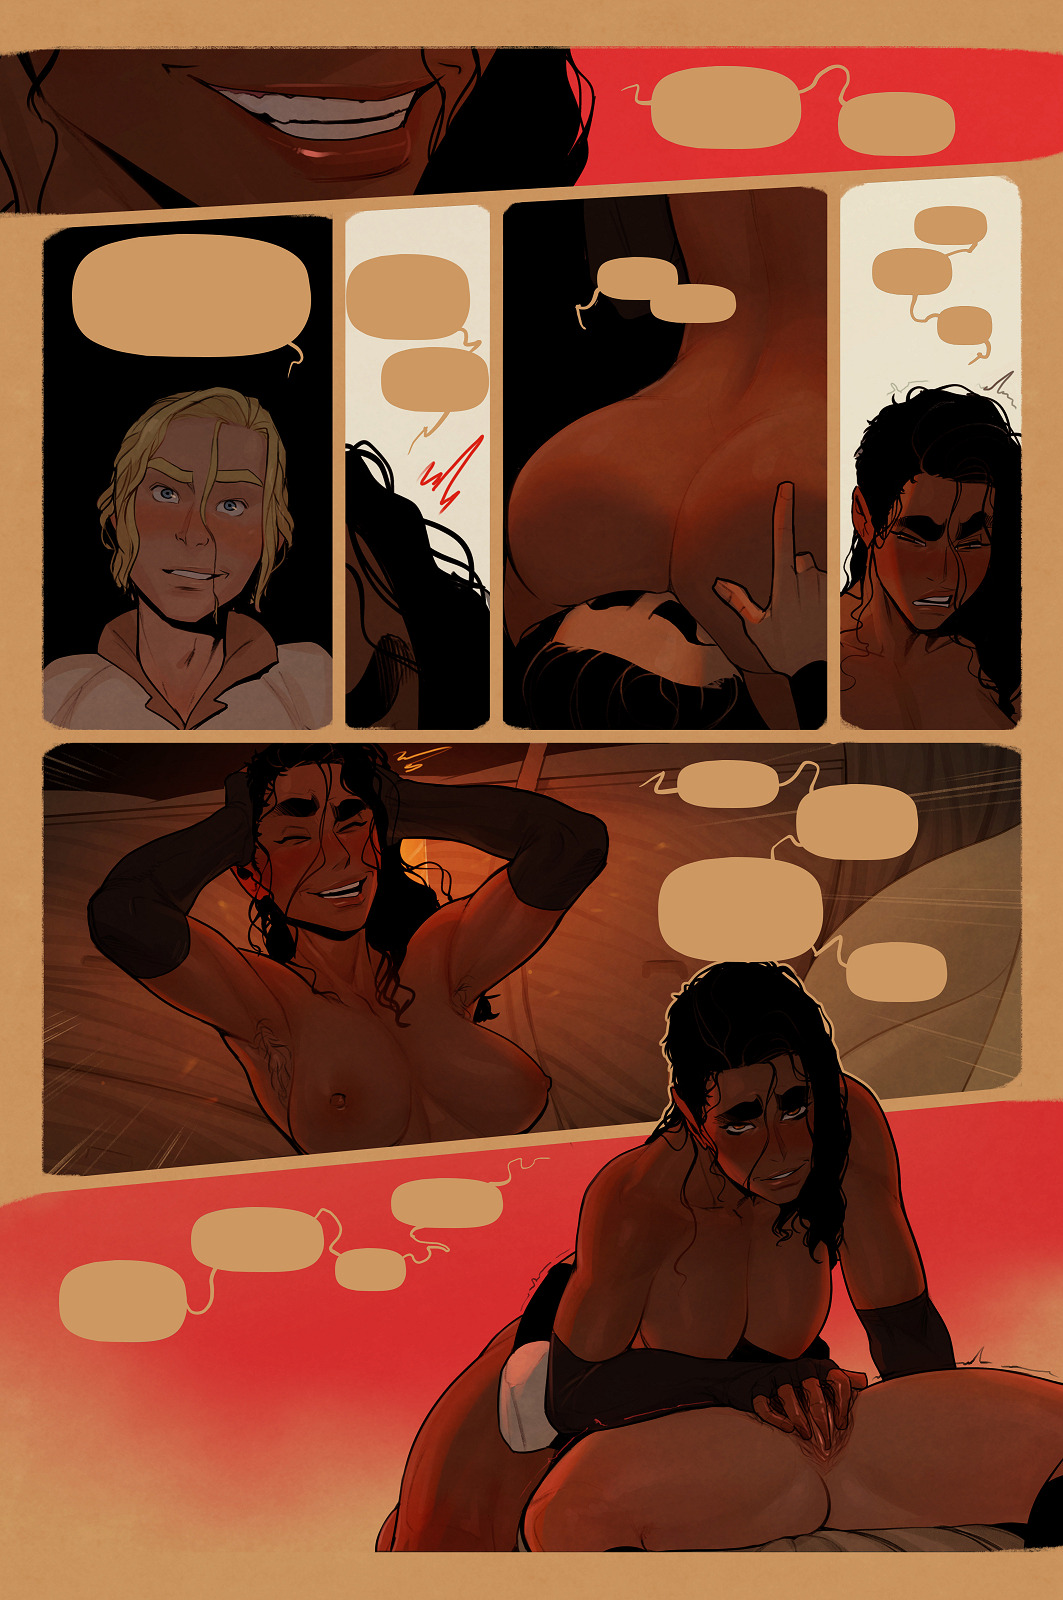 buttsmithy: Pages 25-28 Lesbians doing lesbian things! patreon.com/InCaseArt buttsmithy.com